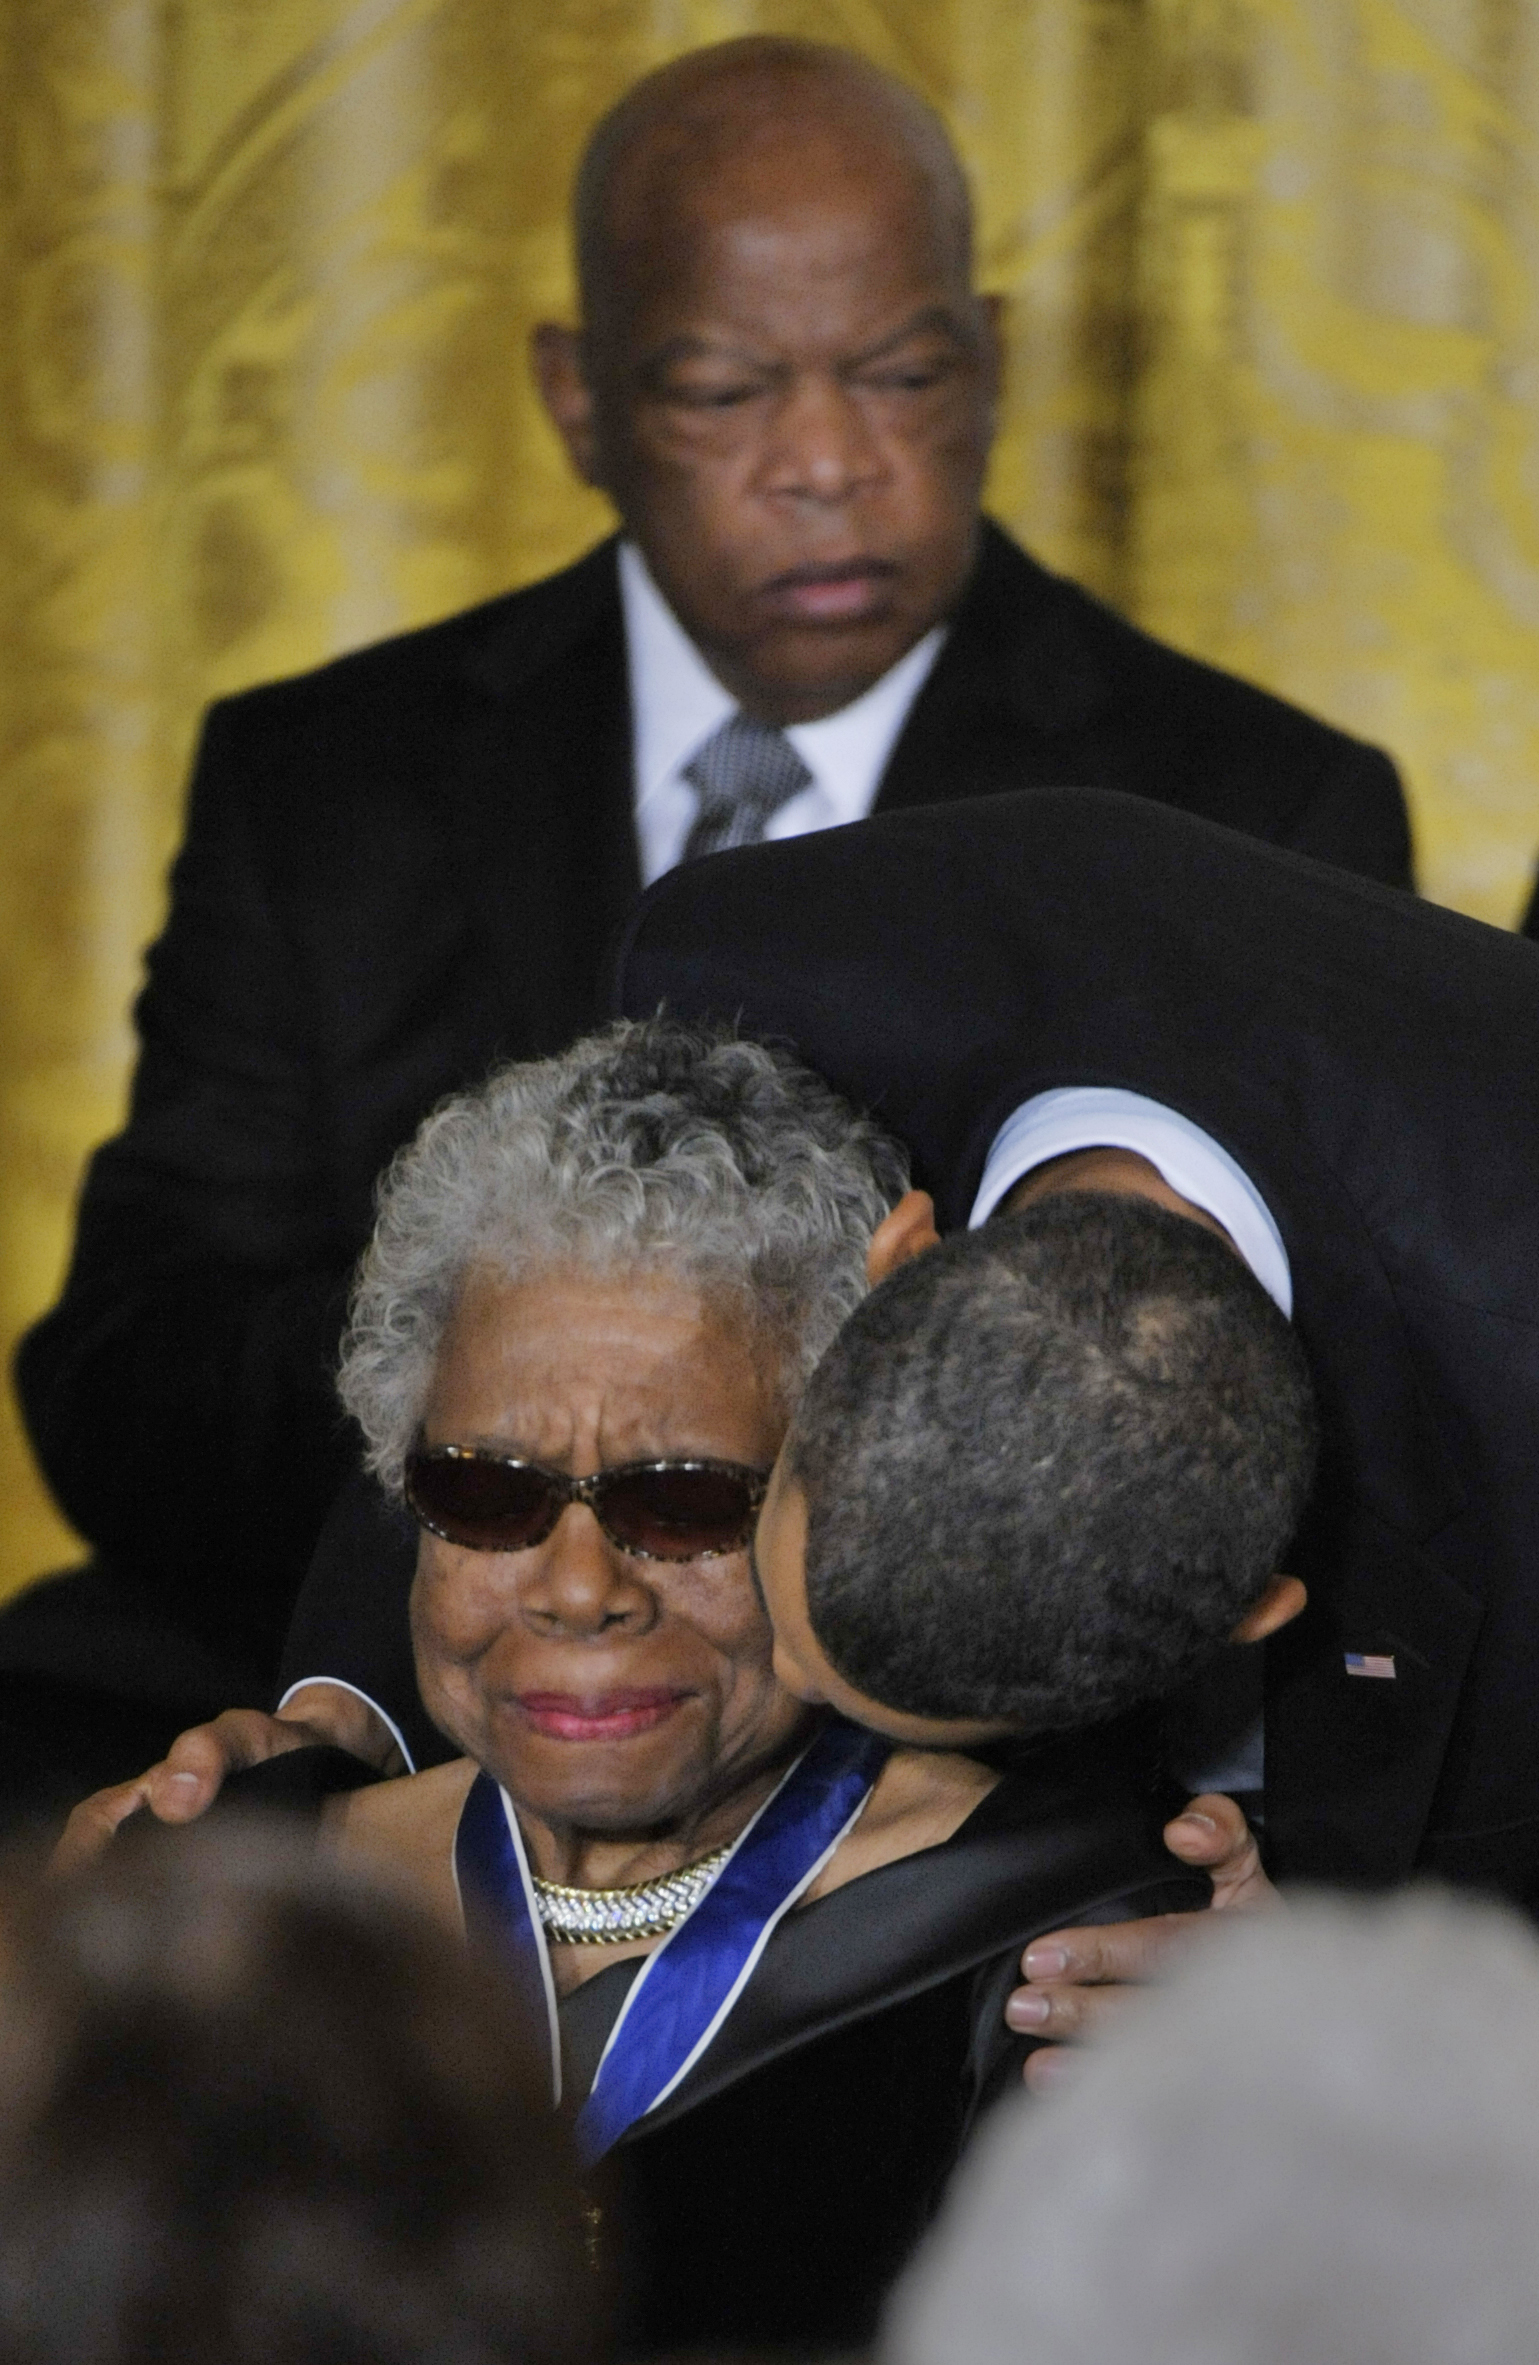 President Obama awards Poet Maya Angelou with the Medal of Freedom as well as a kiss on her cheek, with Medal of Freedom recipient Congressman John Lewis (D-GA) at the White House on February 15, 2011 in Washington. (Marvin Joseph—The Washington Post/Getty Images)